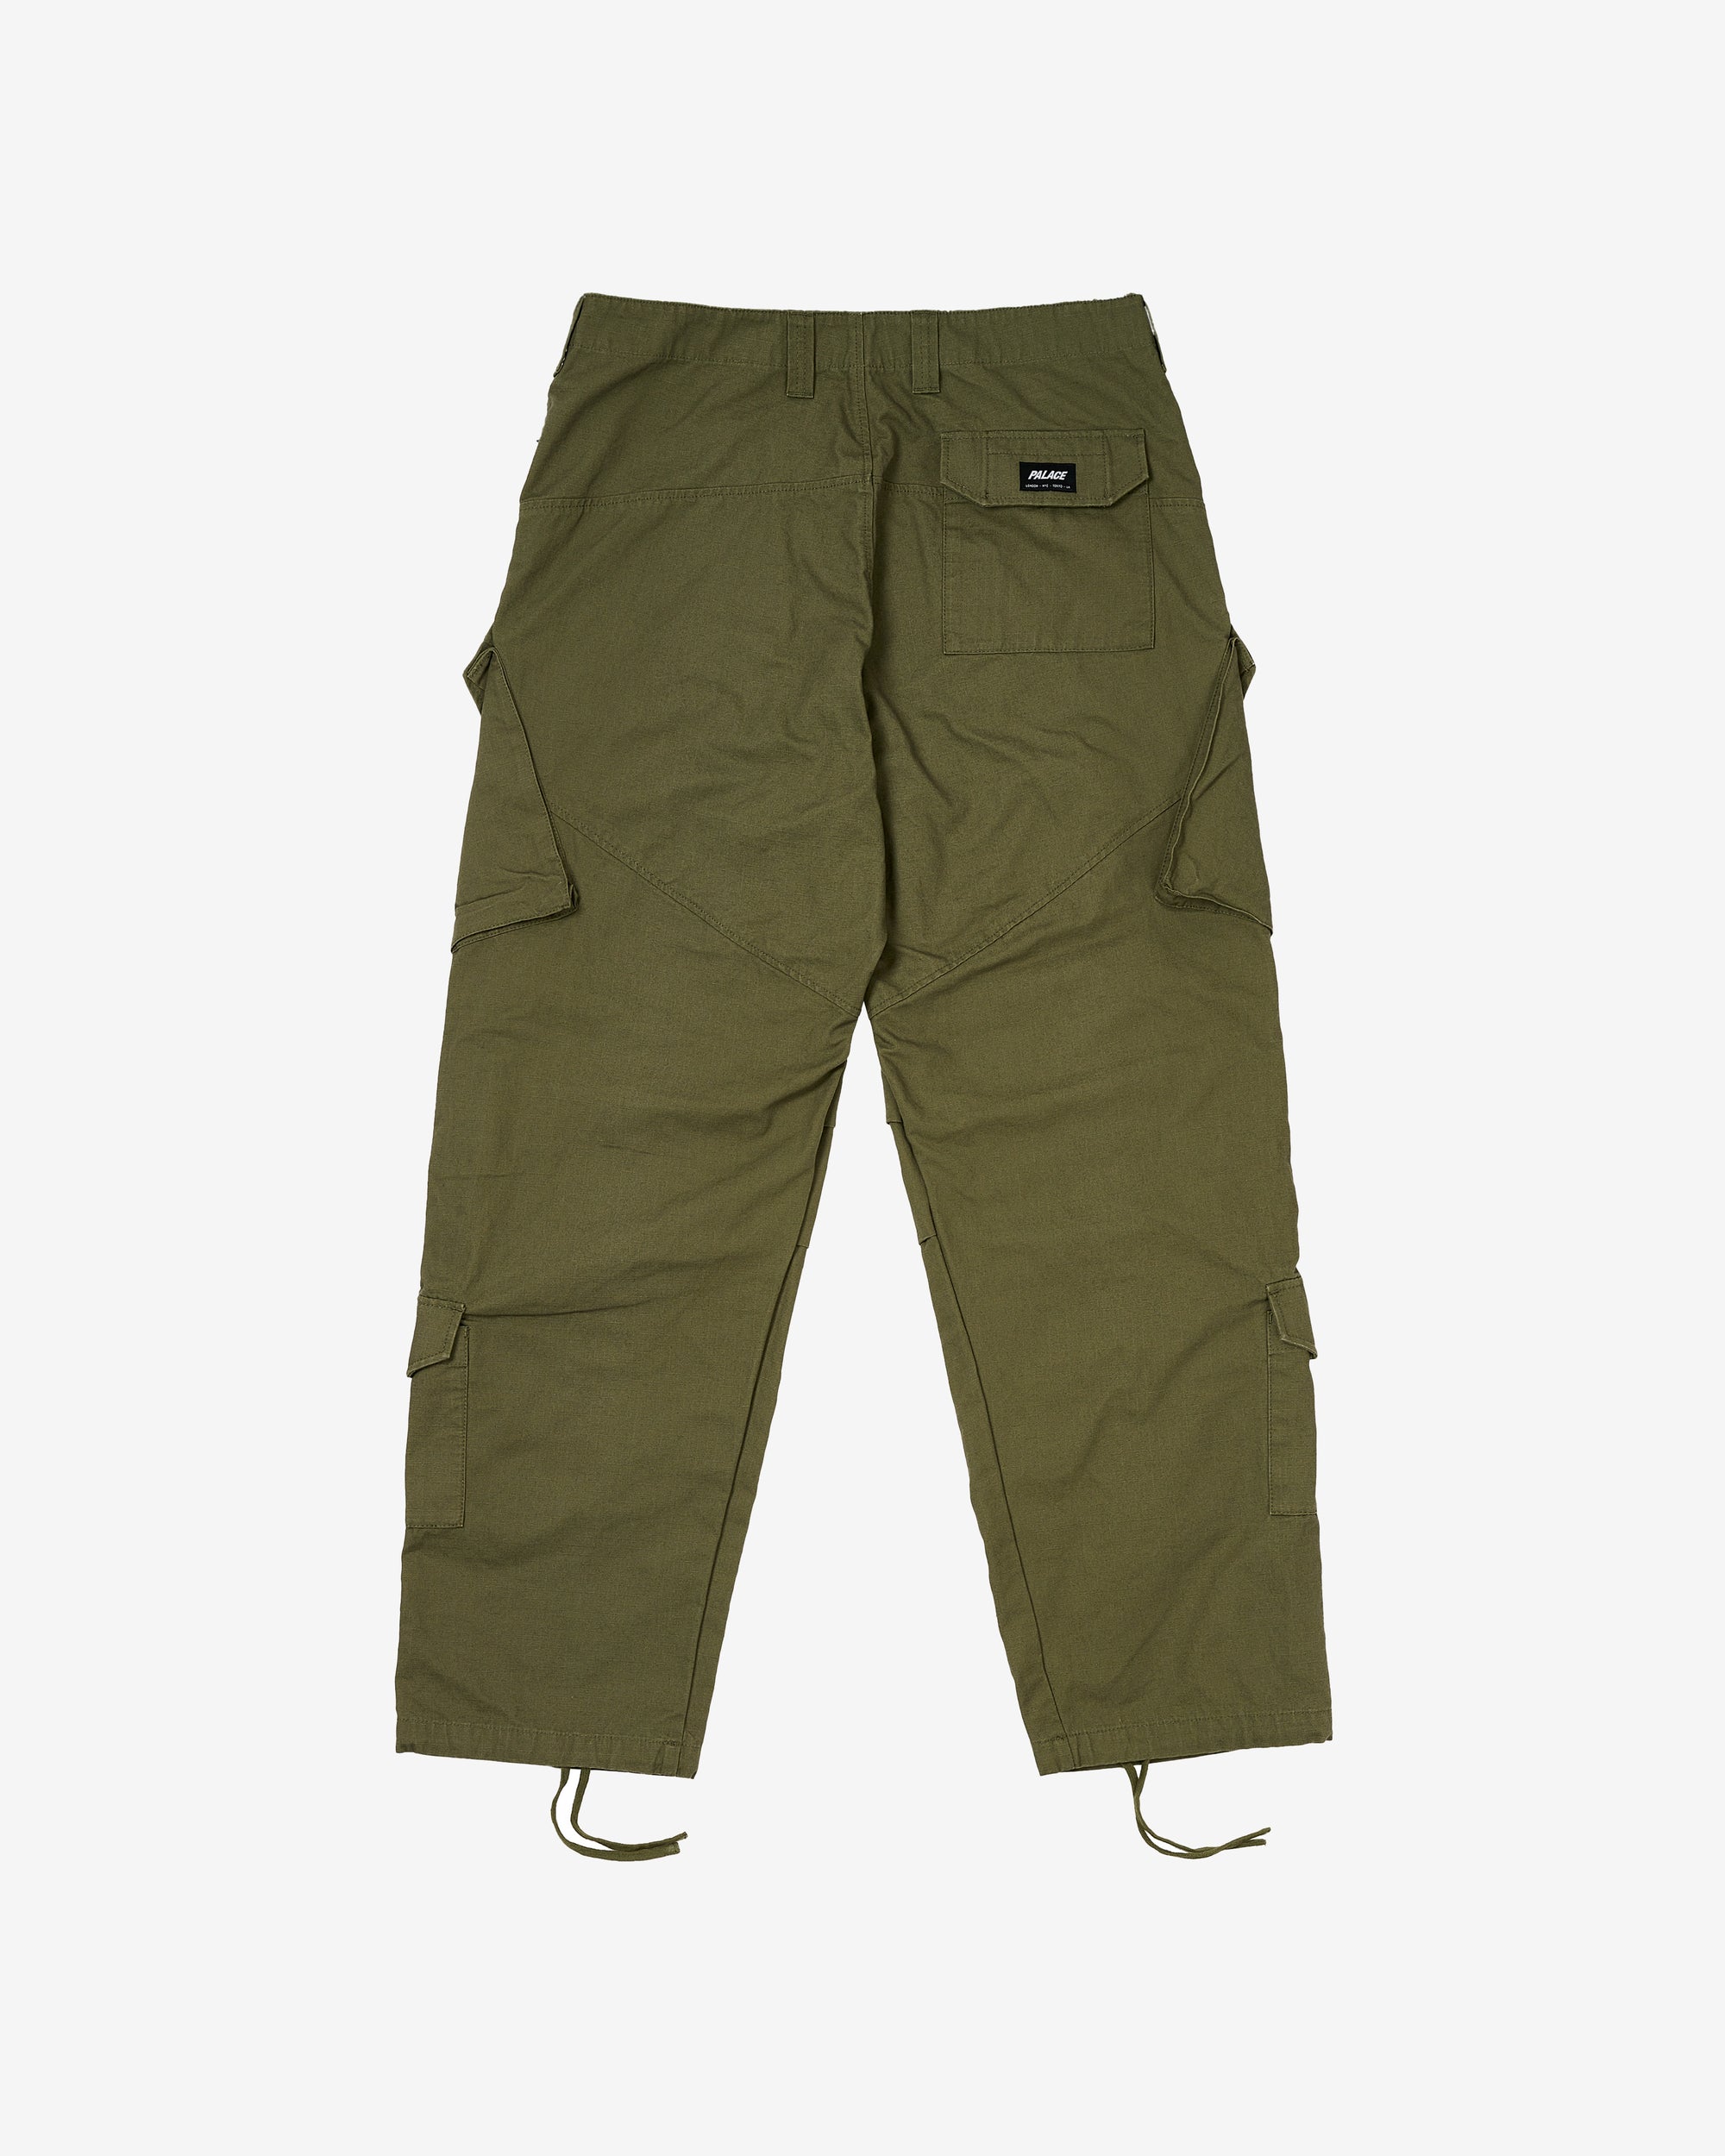 Palace - Men's Rn Cargo Trouser - (Olive) view 2